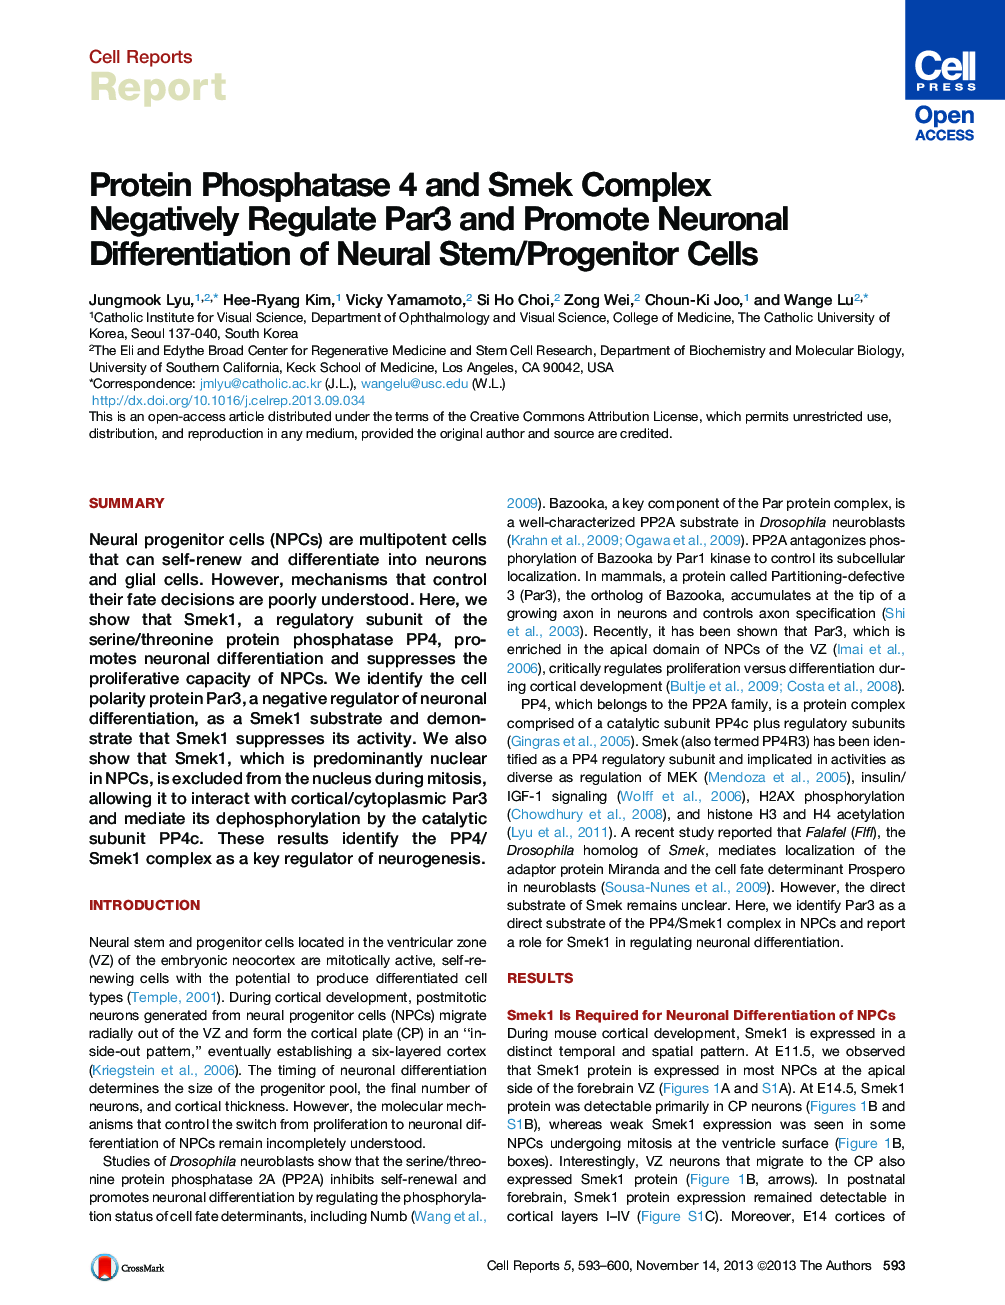 Protein Phosphatase 4 and Smek Complex Negatively Regulate Par3 and Promote Neuronal Differentiation of Neural Stem/Progenitor Cells 